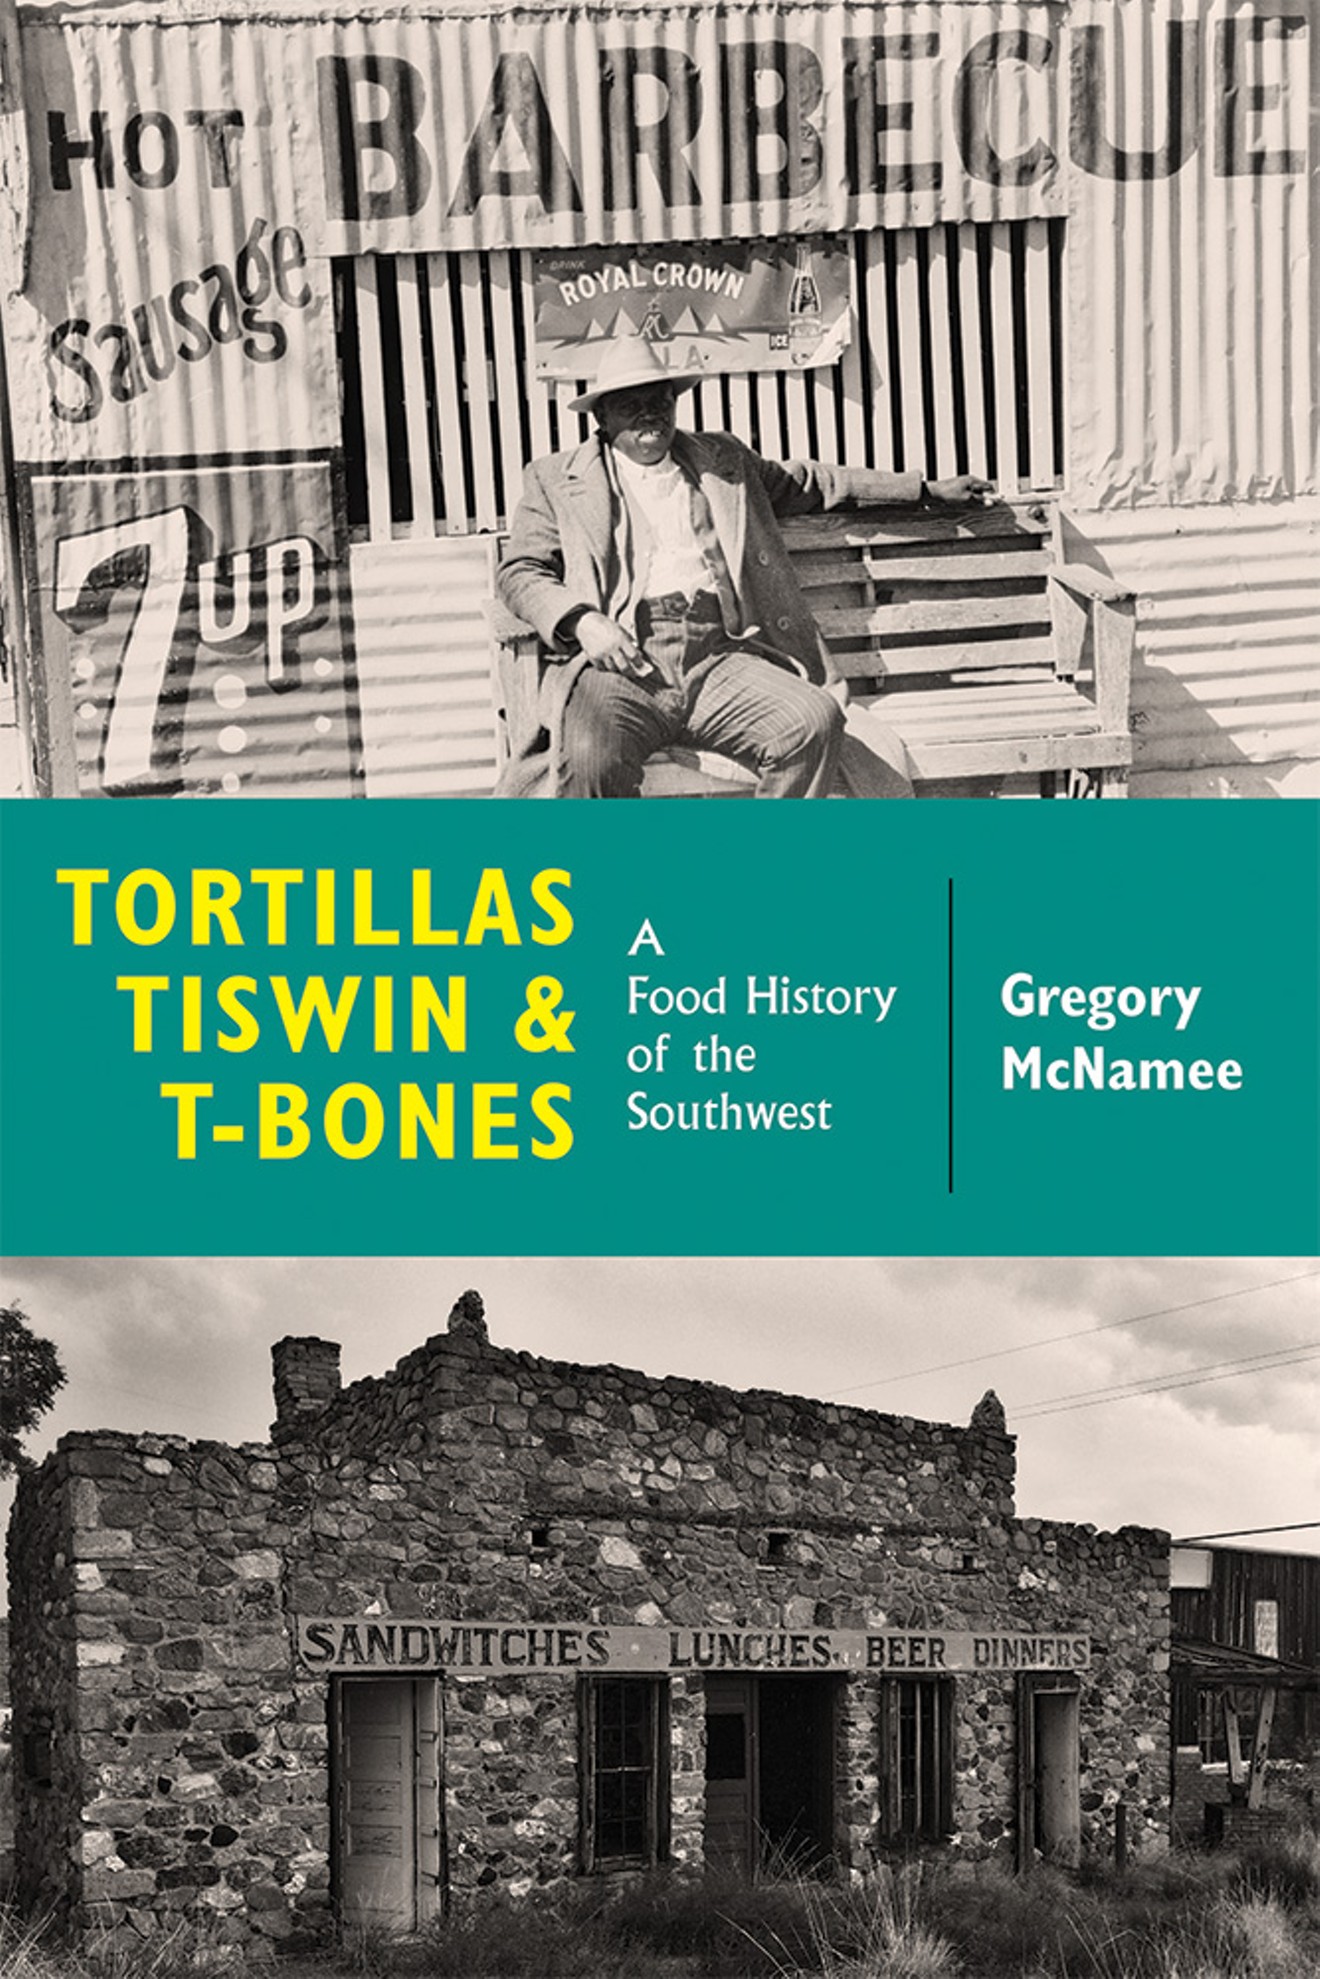 Discover the fascinating food history of the Southwest (hint: it's bigger than you imagined).